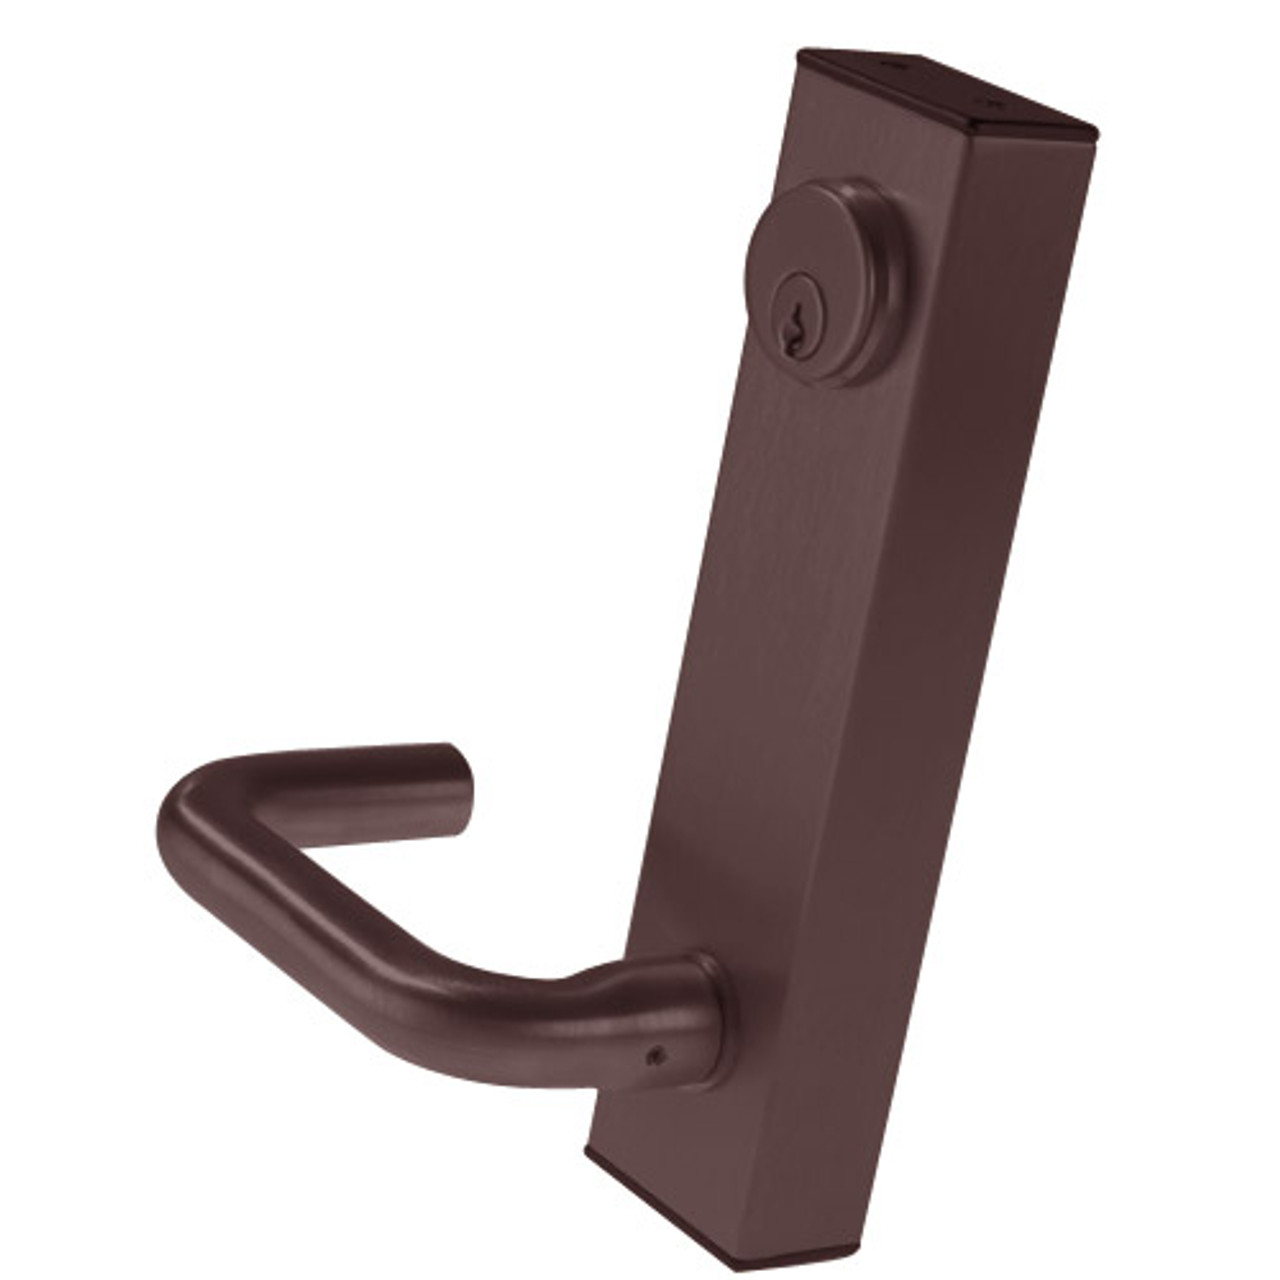 3080E-02-0-9U-55 US10B Adams Rite Electrified Entry Trim with Round Lever in Oil Rubbed Bronze Finish